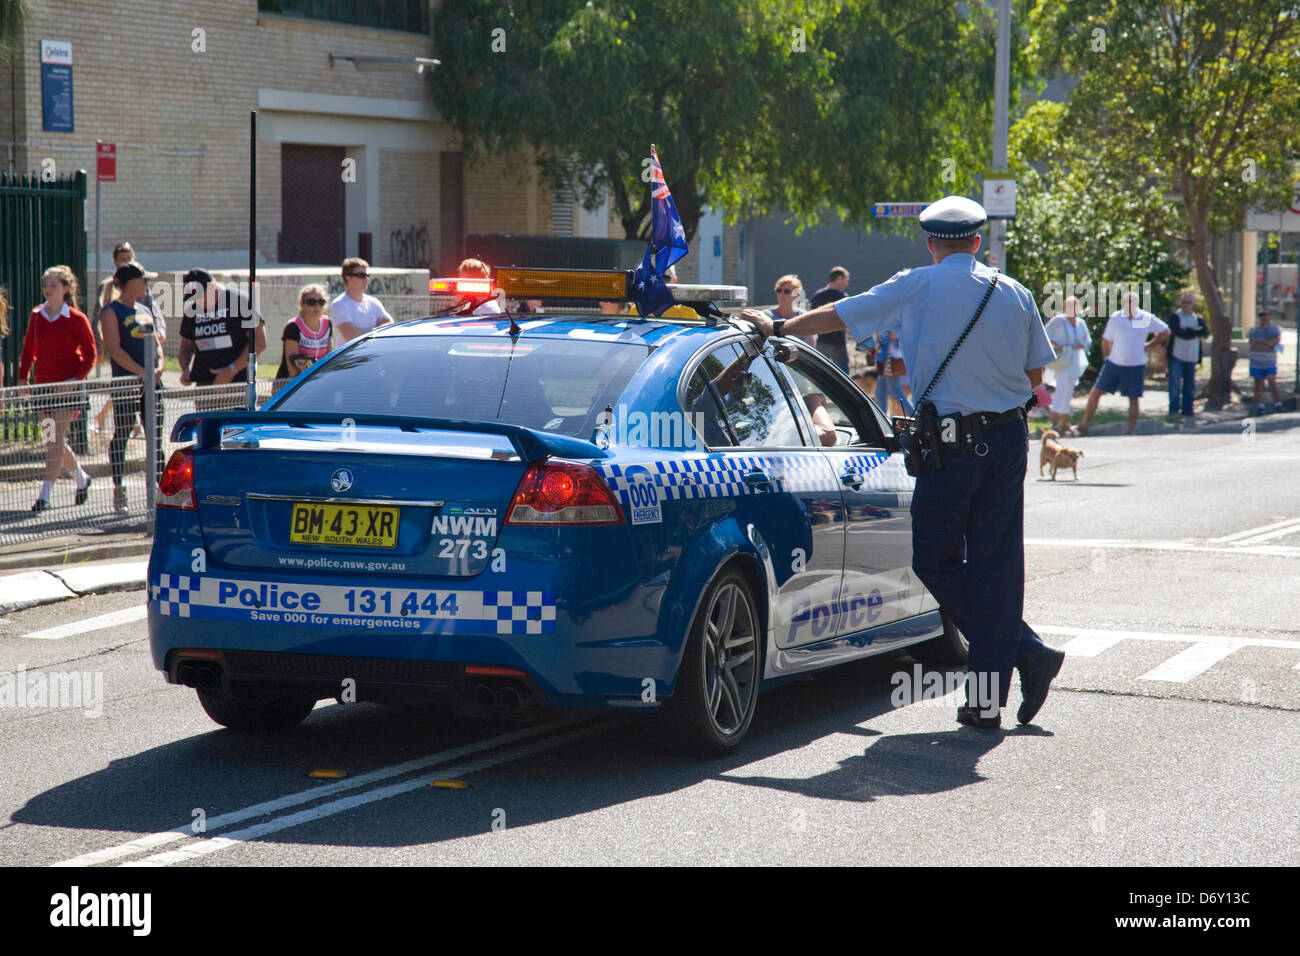 Sydney police officer stood by his police car during ANZAC day march in Sydney,Australia Stock Photo